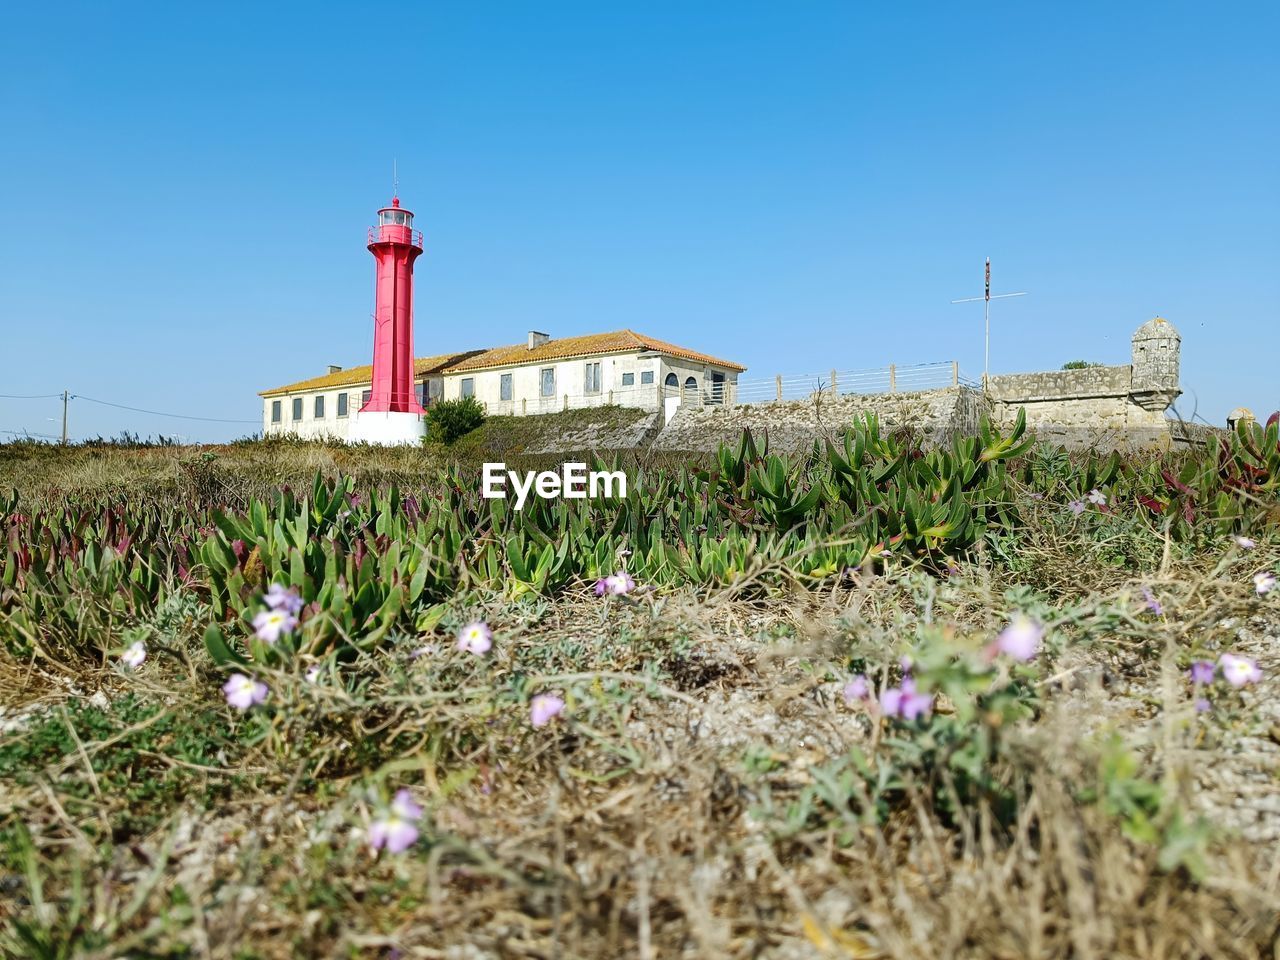 lighthouse, plant, architecture, built structure, sky, building exterior, guidance, nature, tower, flower, building, clear sky, land, flowering plant, no people, security, blue, coast, protection, day, field, grass, sea, outdoors, rural area, growth, landscape, travel destinations, house, beauty in nature, travel